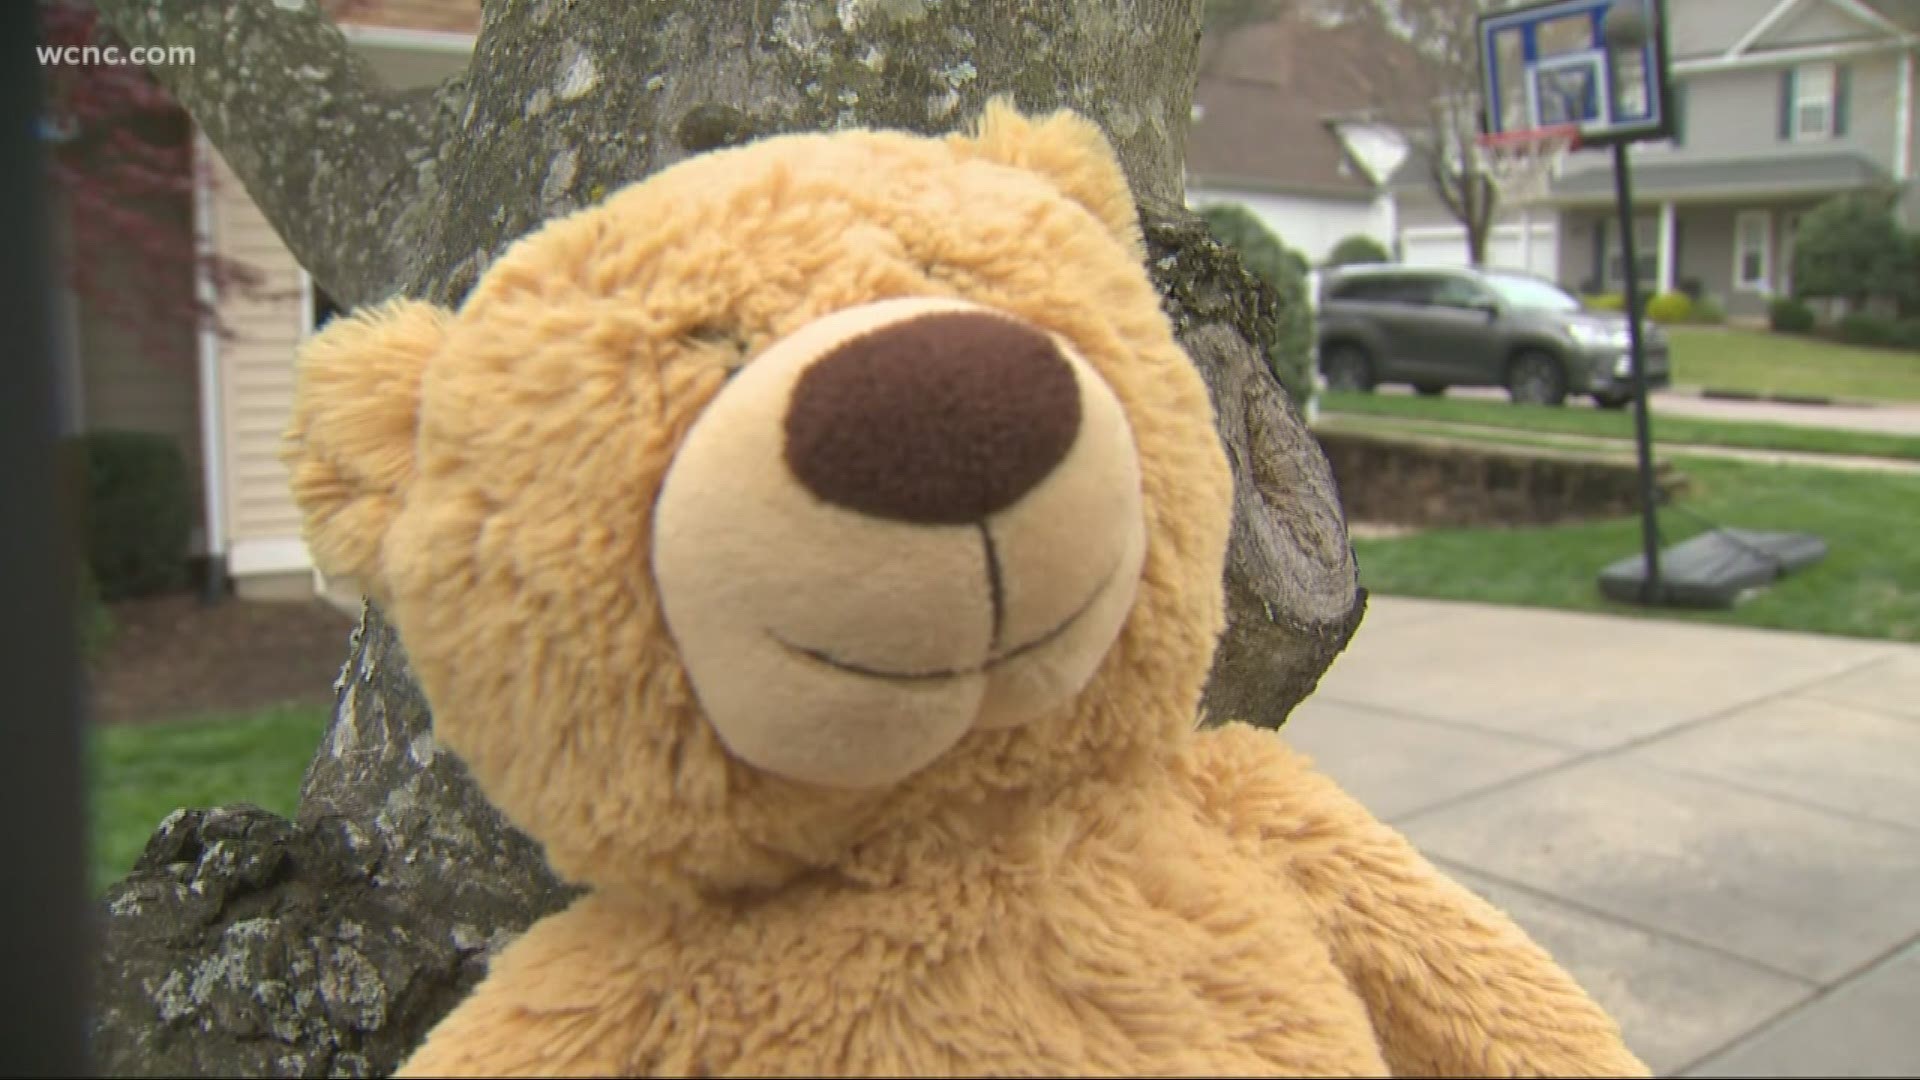 Members of Cornelius neighborhood hide teddy bears around the homes outside for kids to go on a bear hunt to entertain kids during quarantine.